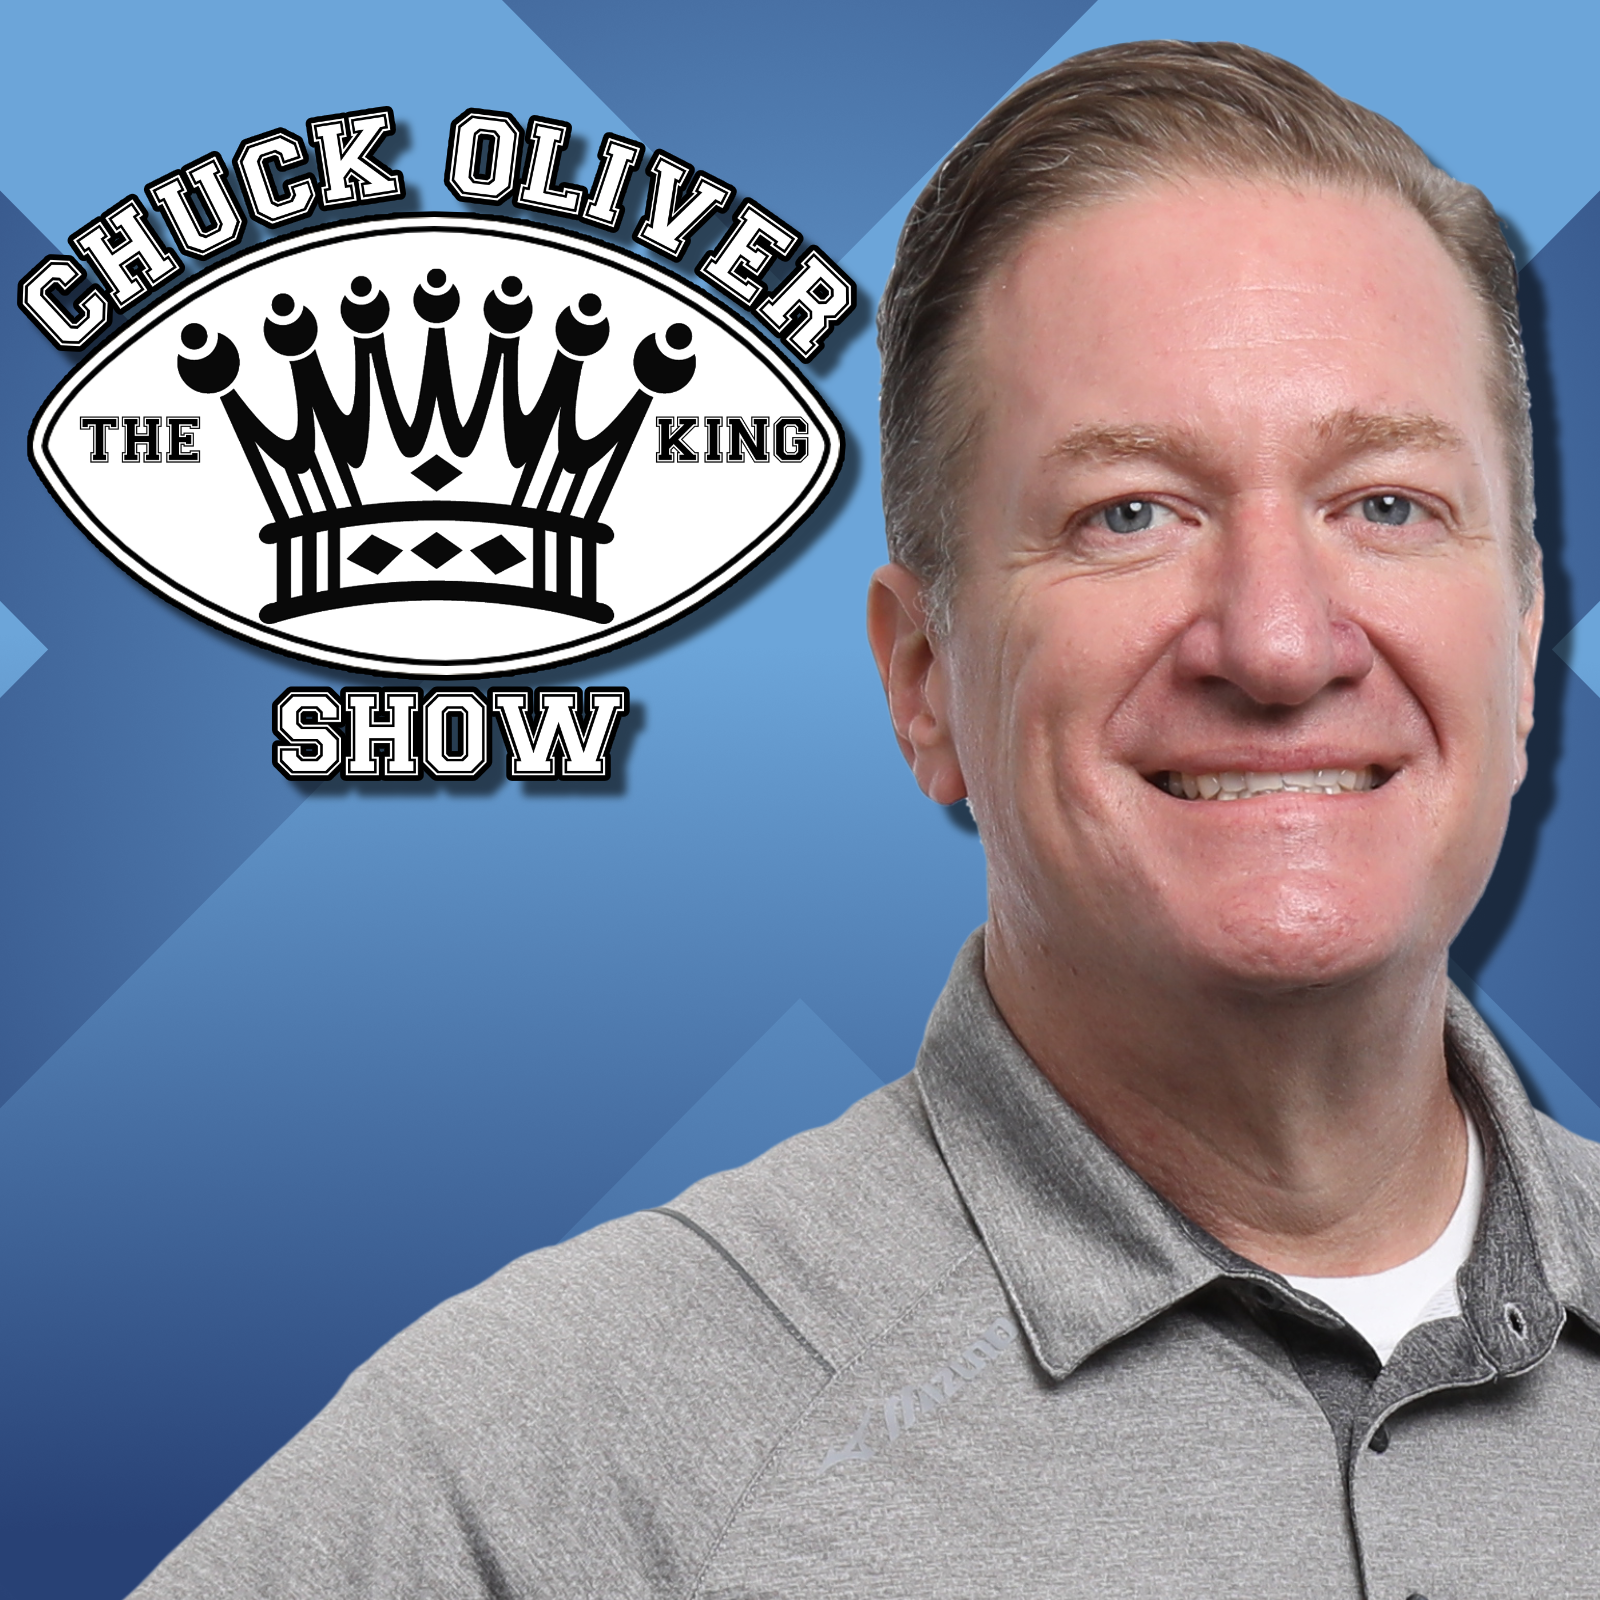 CHUCK OLIVER SHOW 3-29 FRIDAY HOUR 1